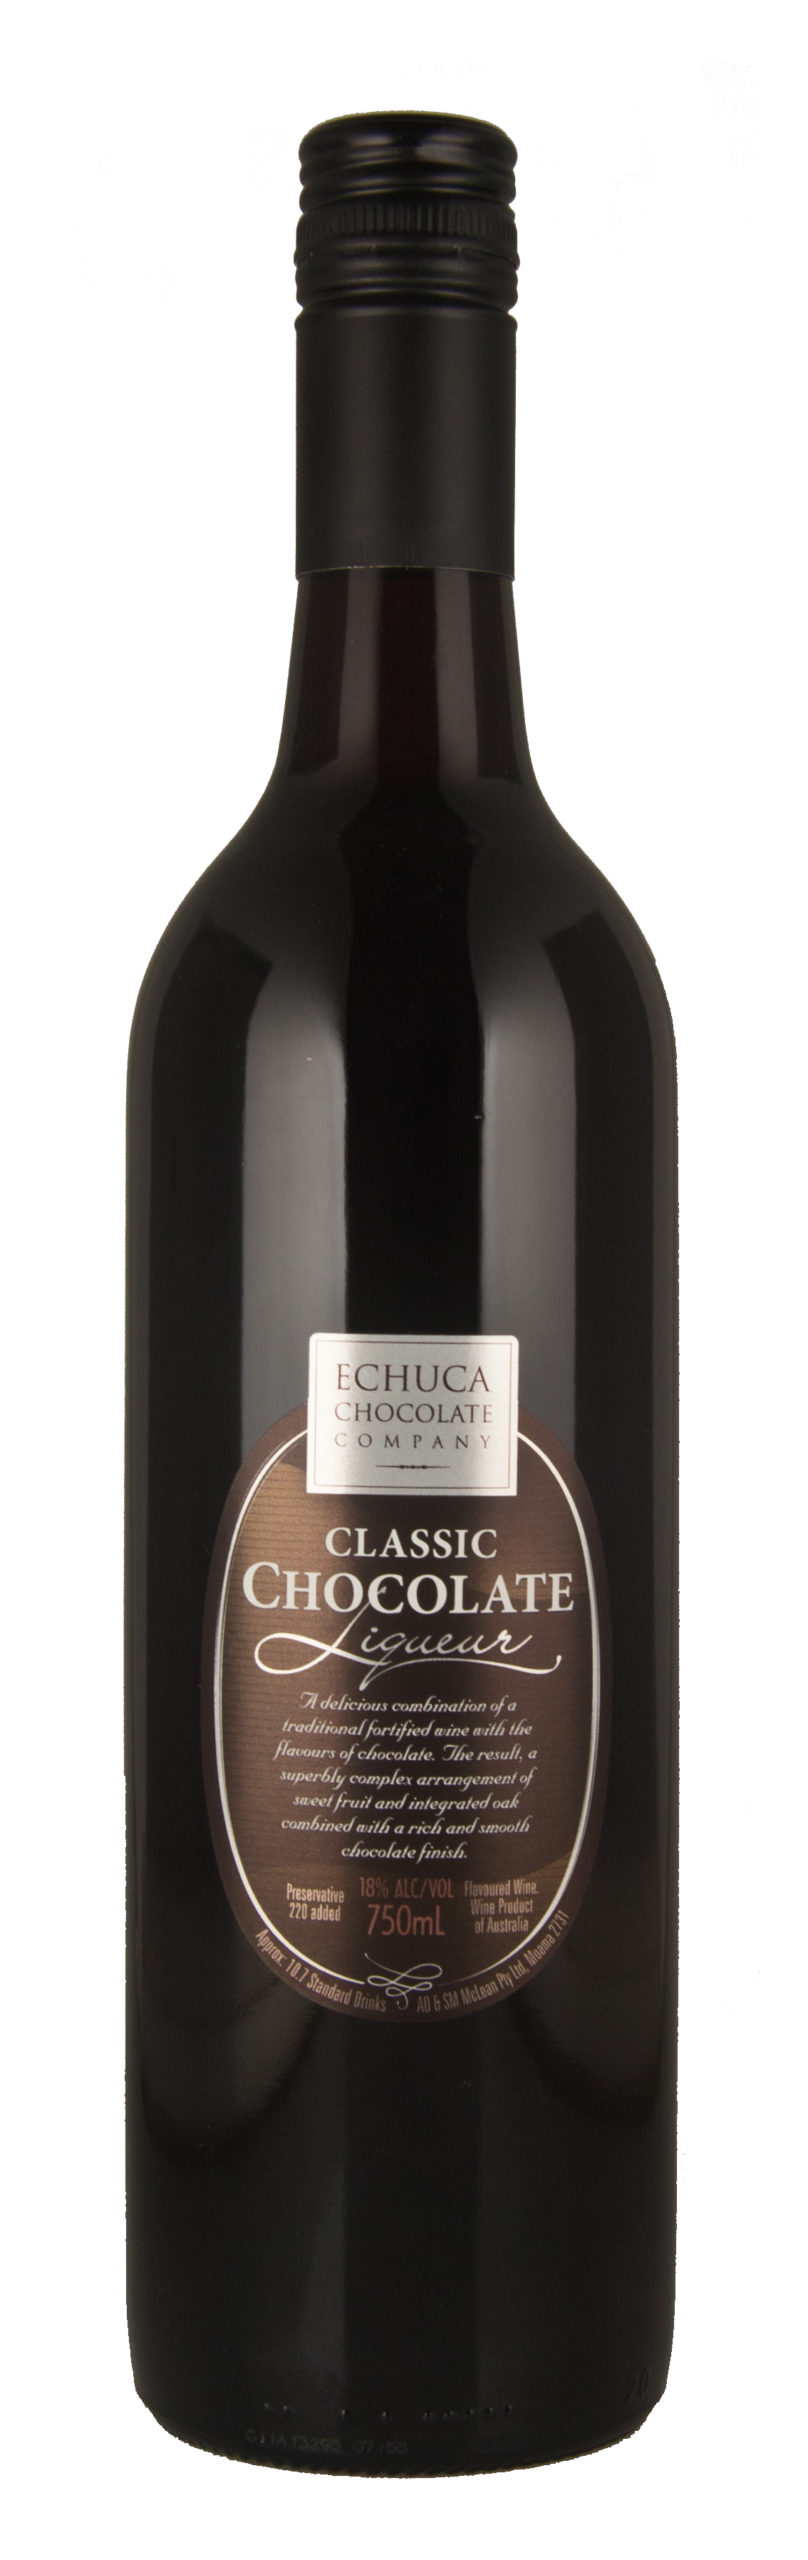 Classic Chocolate Liqueur from Echuca Chocolate Company